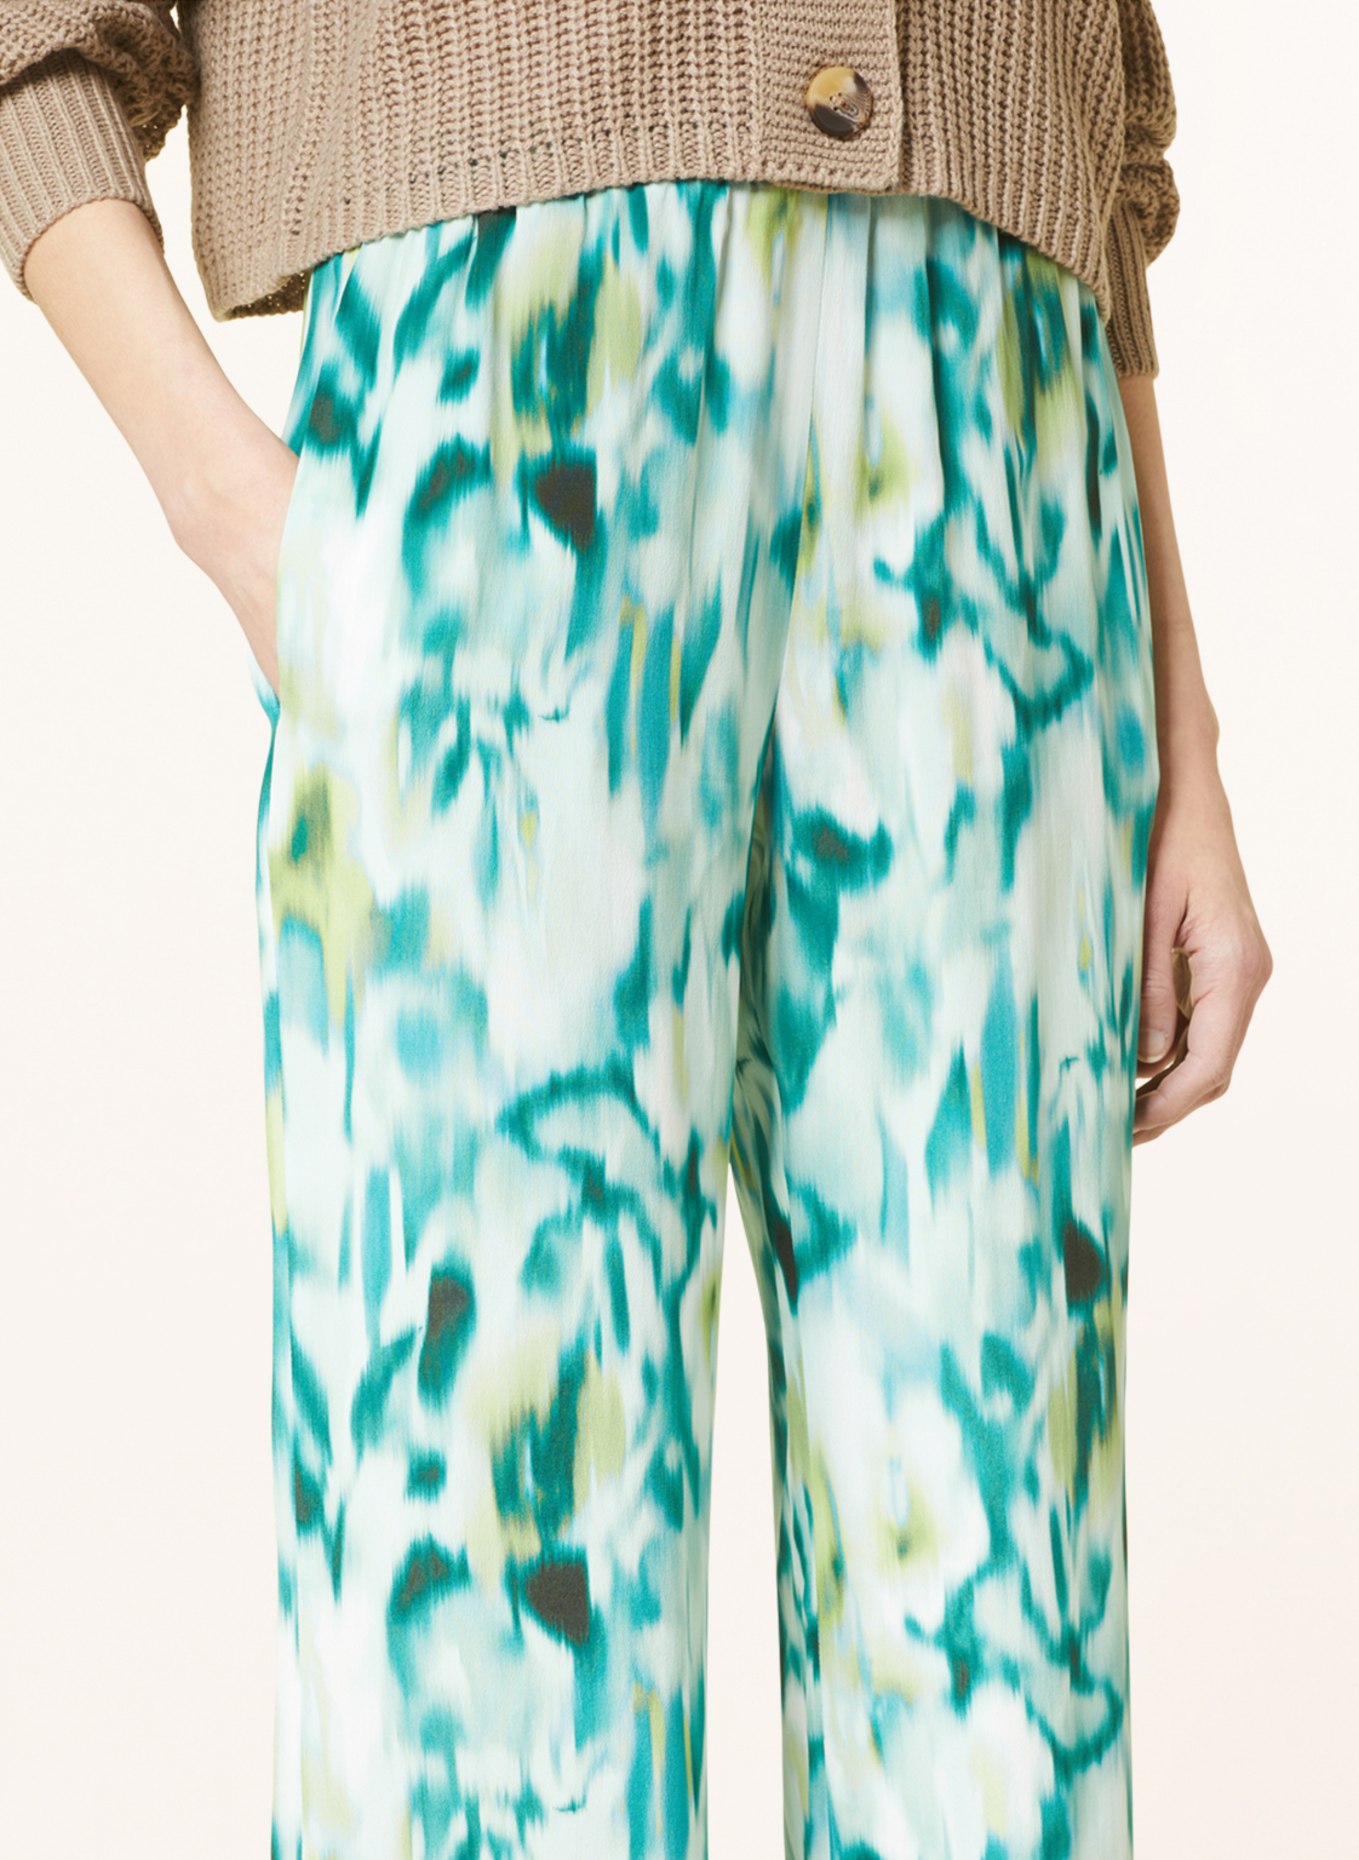 ANTONELLI firenze Wide leg trousers with silk, Color: TURQUOISE/ MINT/ DARK YELLOW (Image 5)